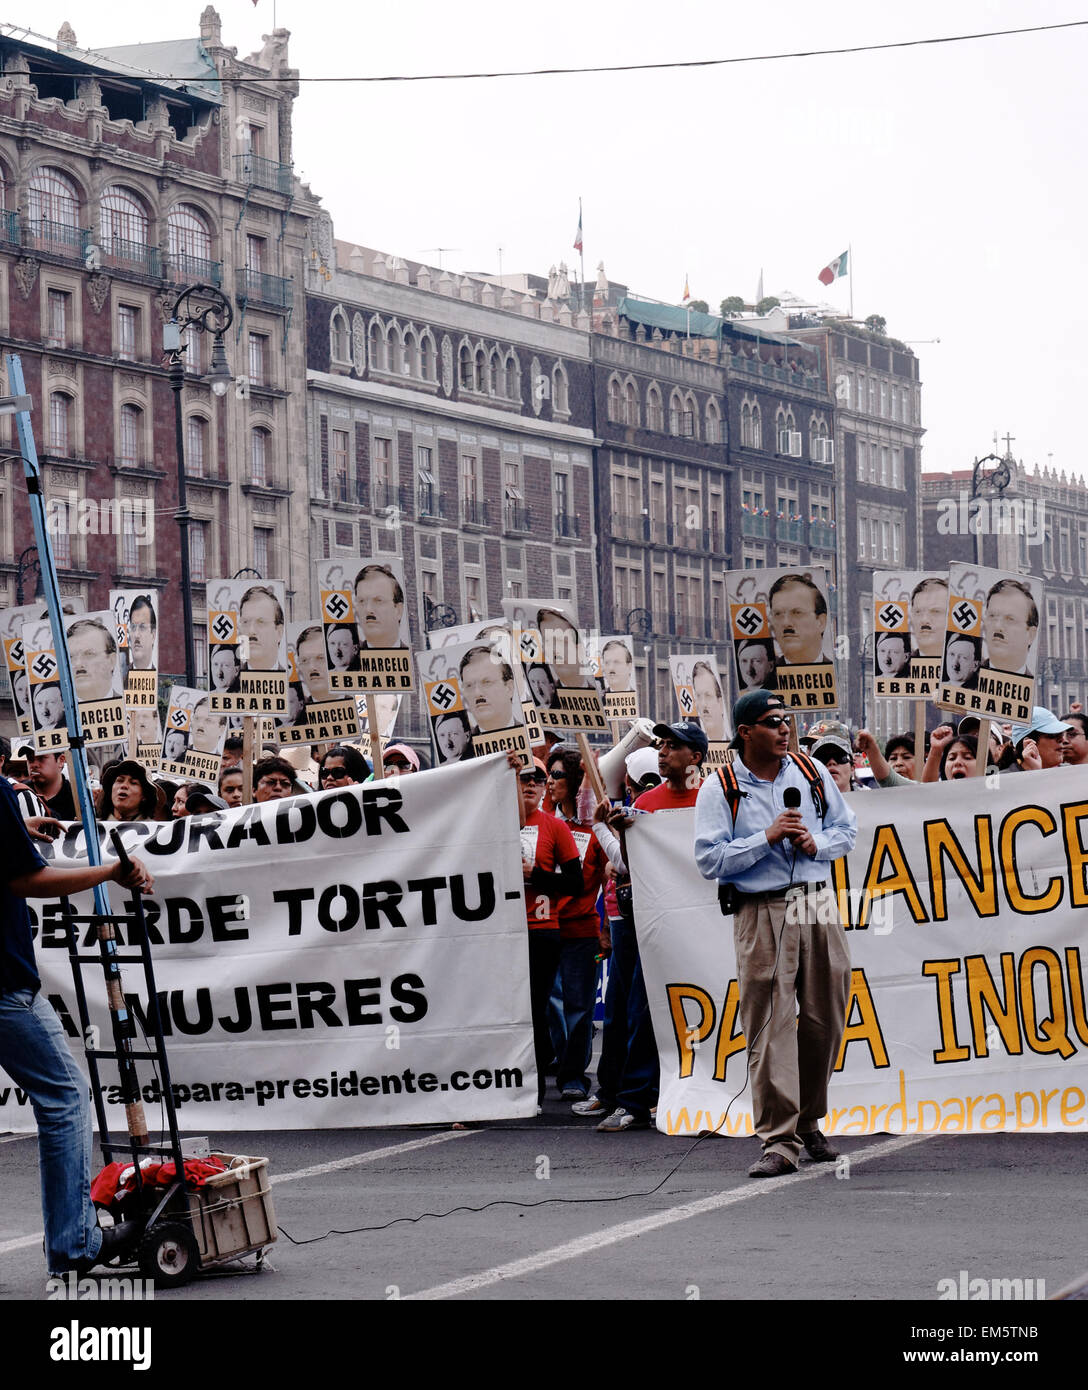 Protest and protesters in the Zocalo, Mexico City, during a demonstration Stock Photo